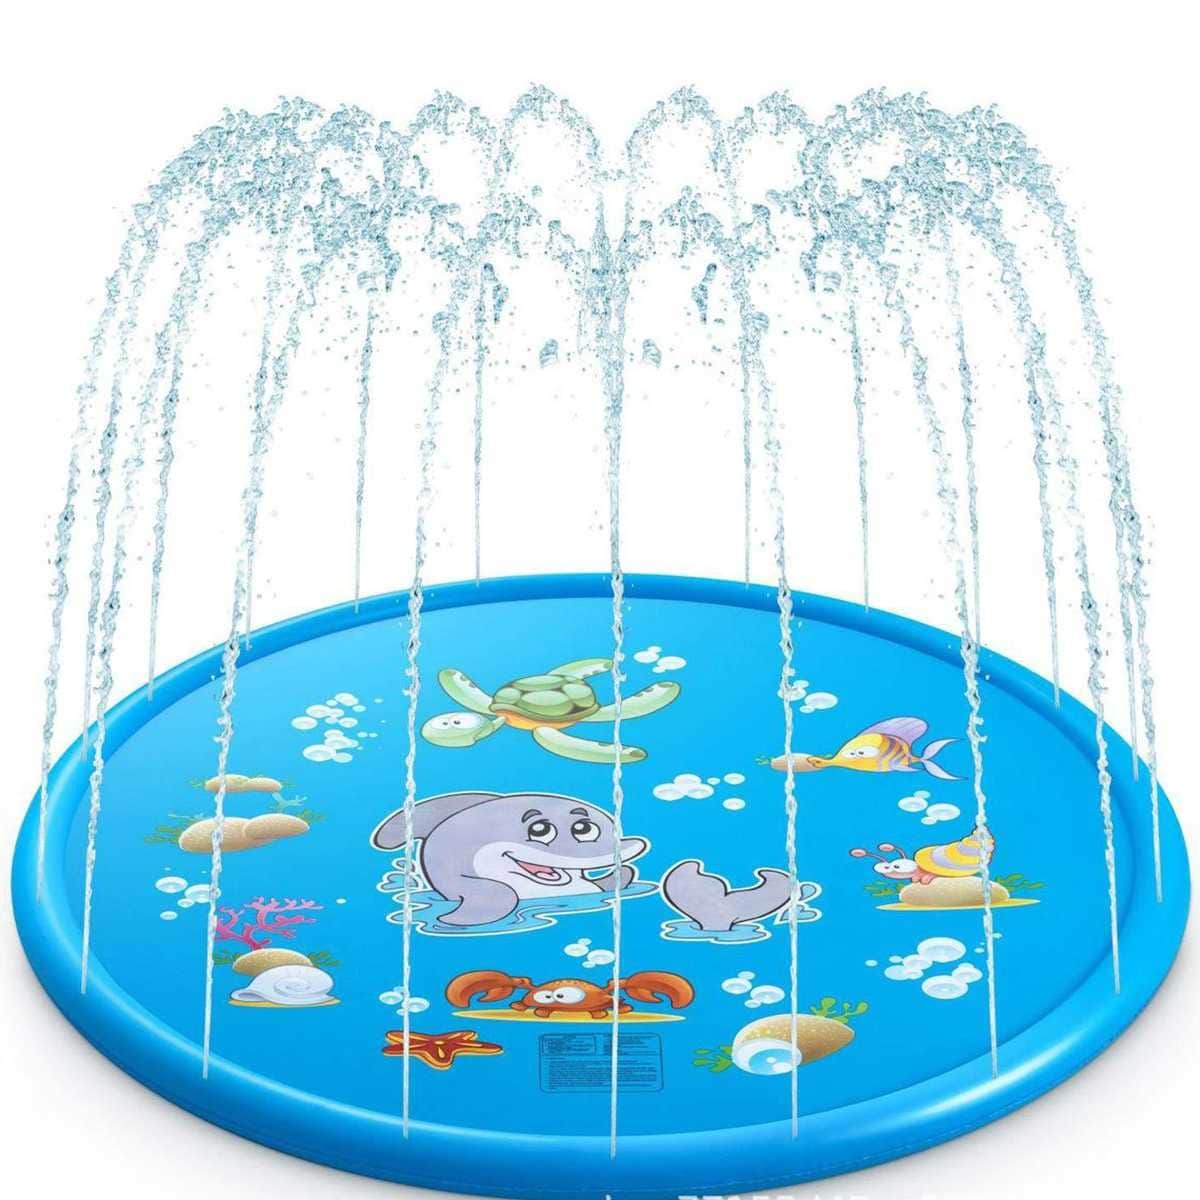 100/170cmx Children Outdoor Funny Toys Kids Inflatable Round Water Splash Play Pools Playing Sprinkler Mat Yard Water Sp Blue - 2